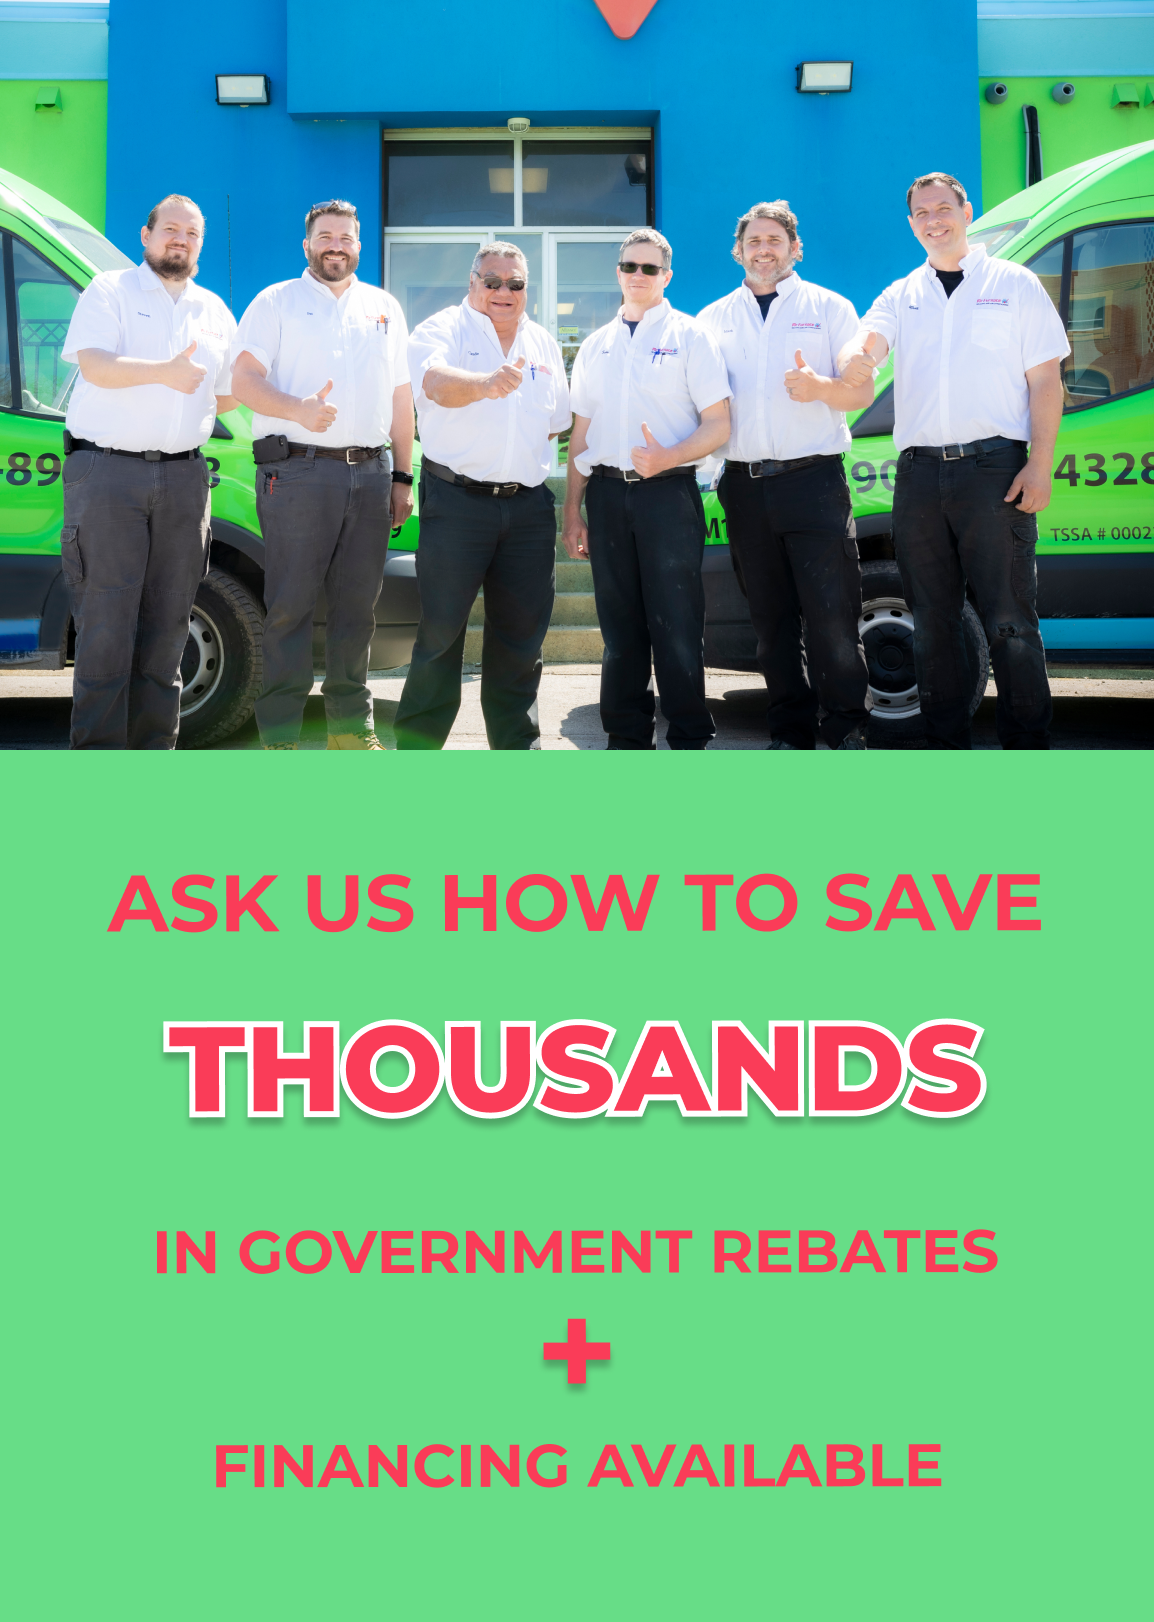 Heat Pump Installation Fort Erie: save thousands in government rebates